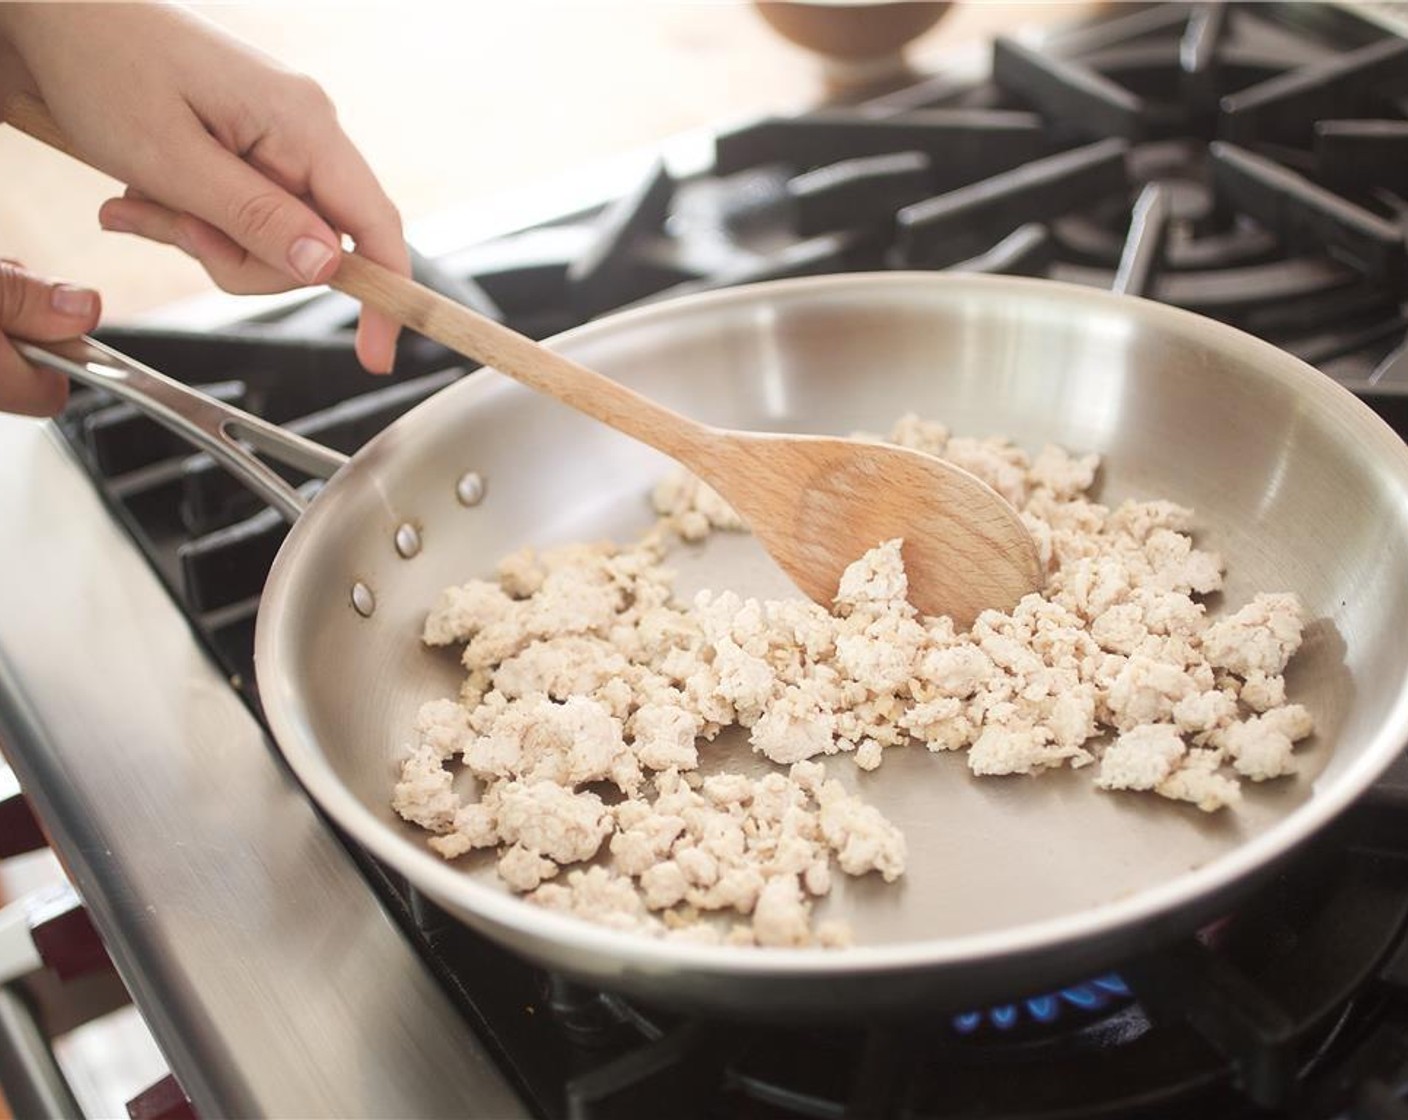 step 4 In a large saute pan over medium-high heat, add 2 teaspoon of olive oil. Once the oil is hot, add Ground Chicken (8 oz) and cook for 3 minutes.